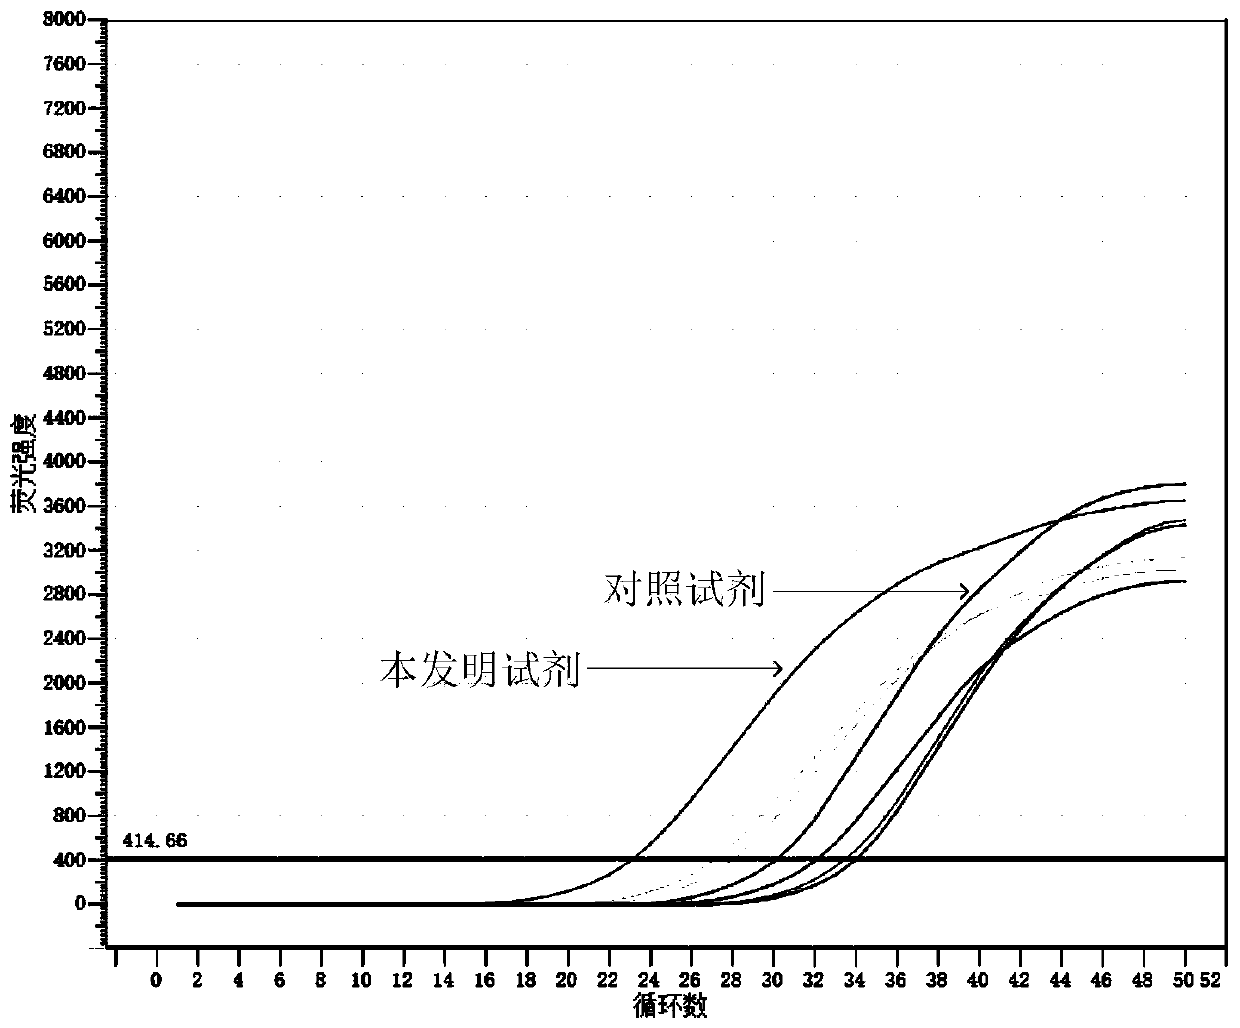 Lysate, nucleic acid extraction kit, and nucleic acid extraction method for nucleic acid extraction